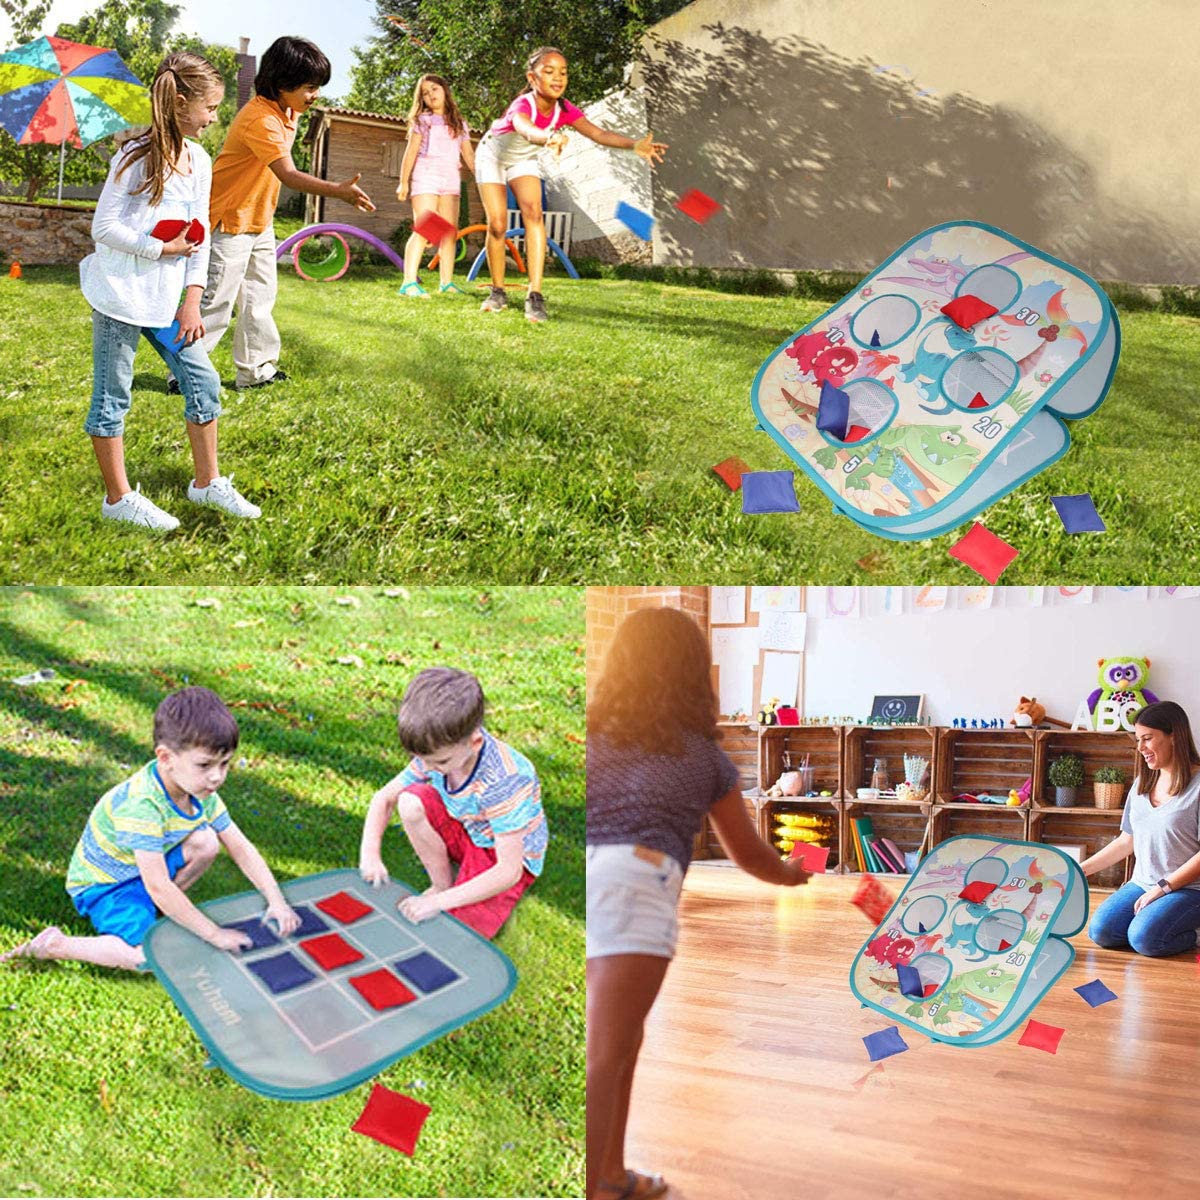 XQW Bean Bag Toss Game Toys for 2 3 4 5 6 Year Old Boys Girls Indoor Outdoor Backyard Play Toys Games for Kids Adults Family Outdoor Toys for Toddlers Kids Ages 2-4 4-8 